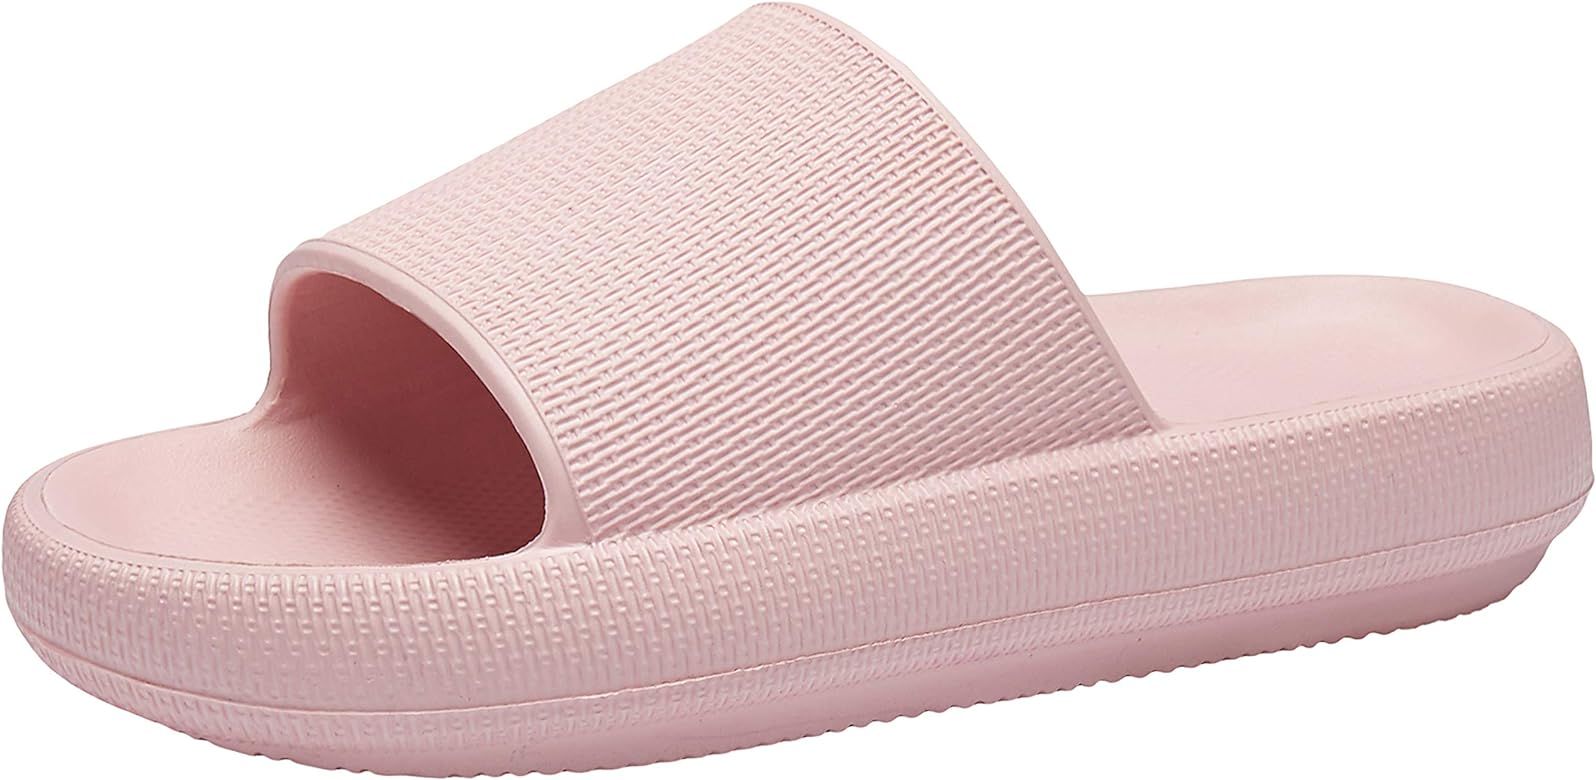 Slippers for Women and Men Quick Drying Bathroom Shower Sandals Open Toe Soft Cushioned Extra Thi... | Amazon (US)